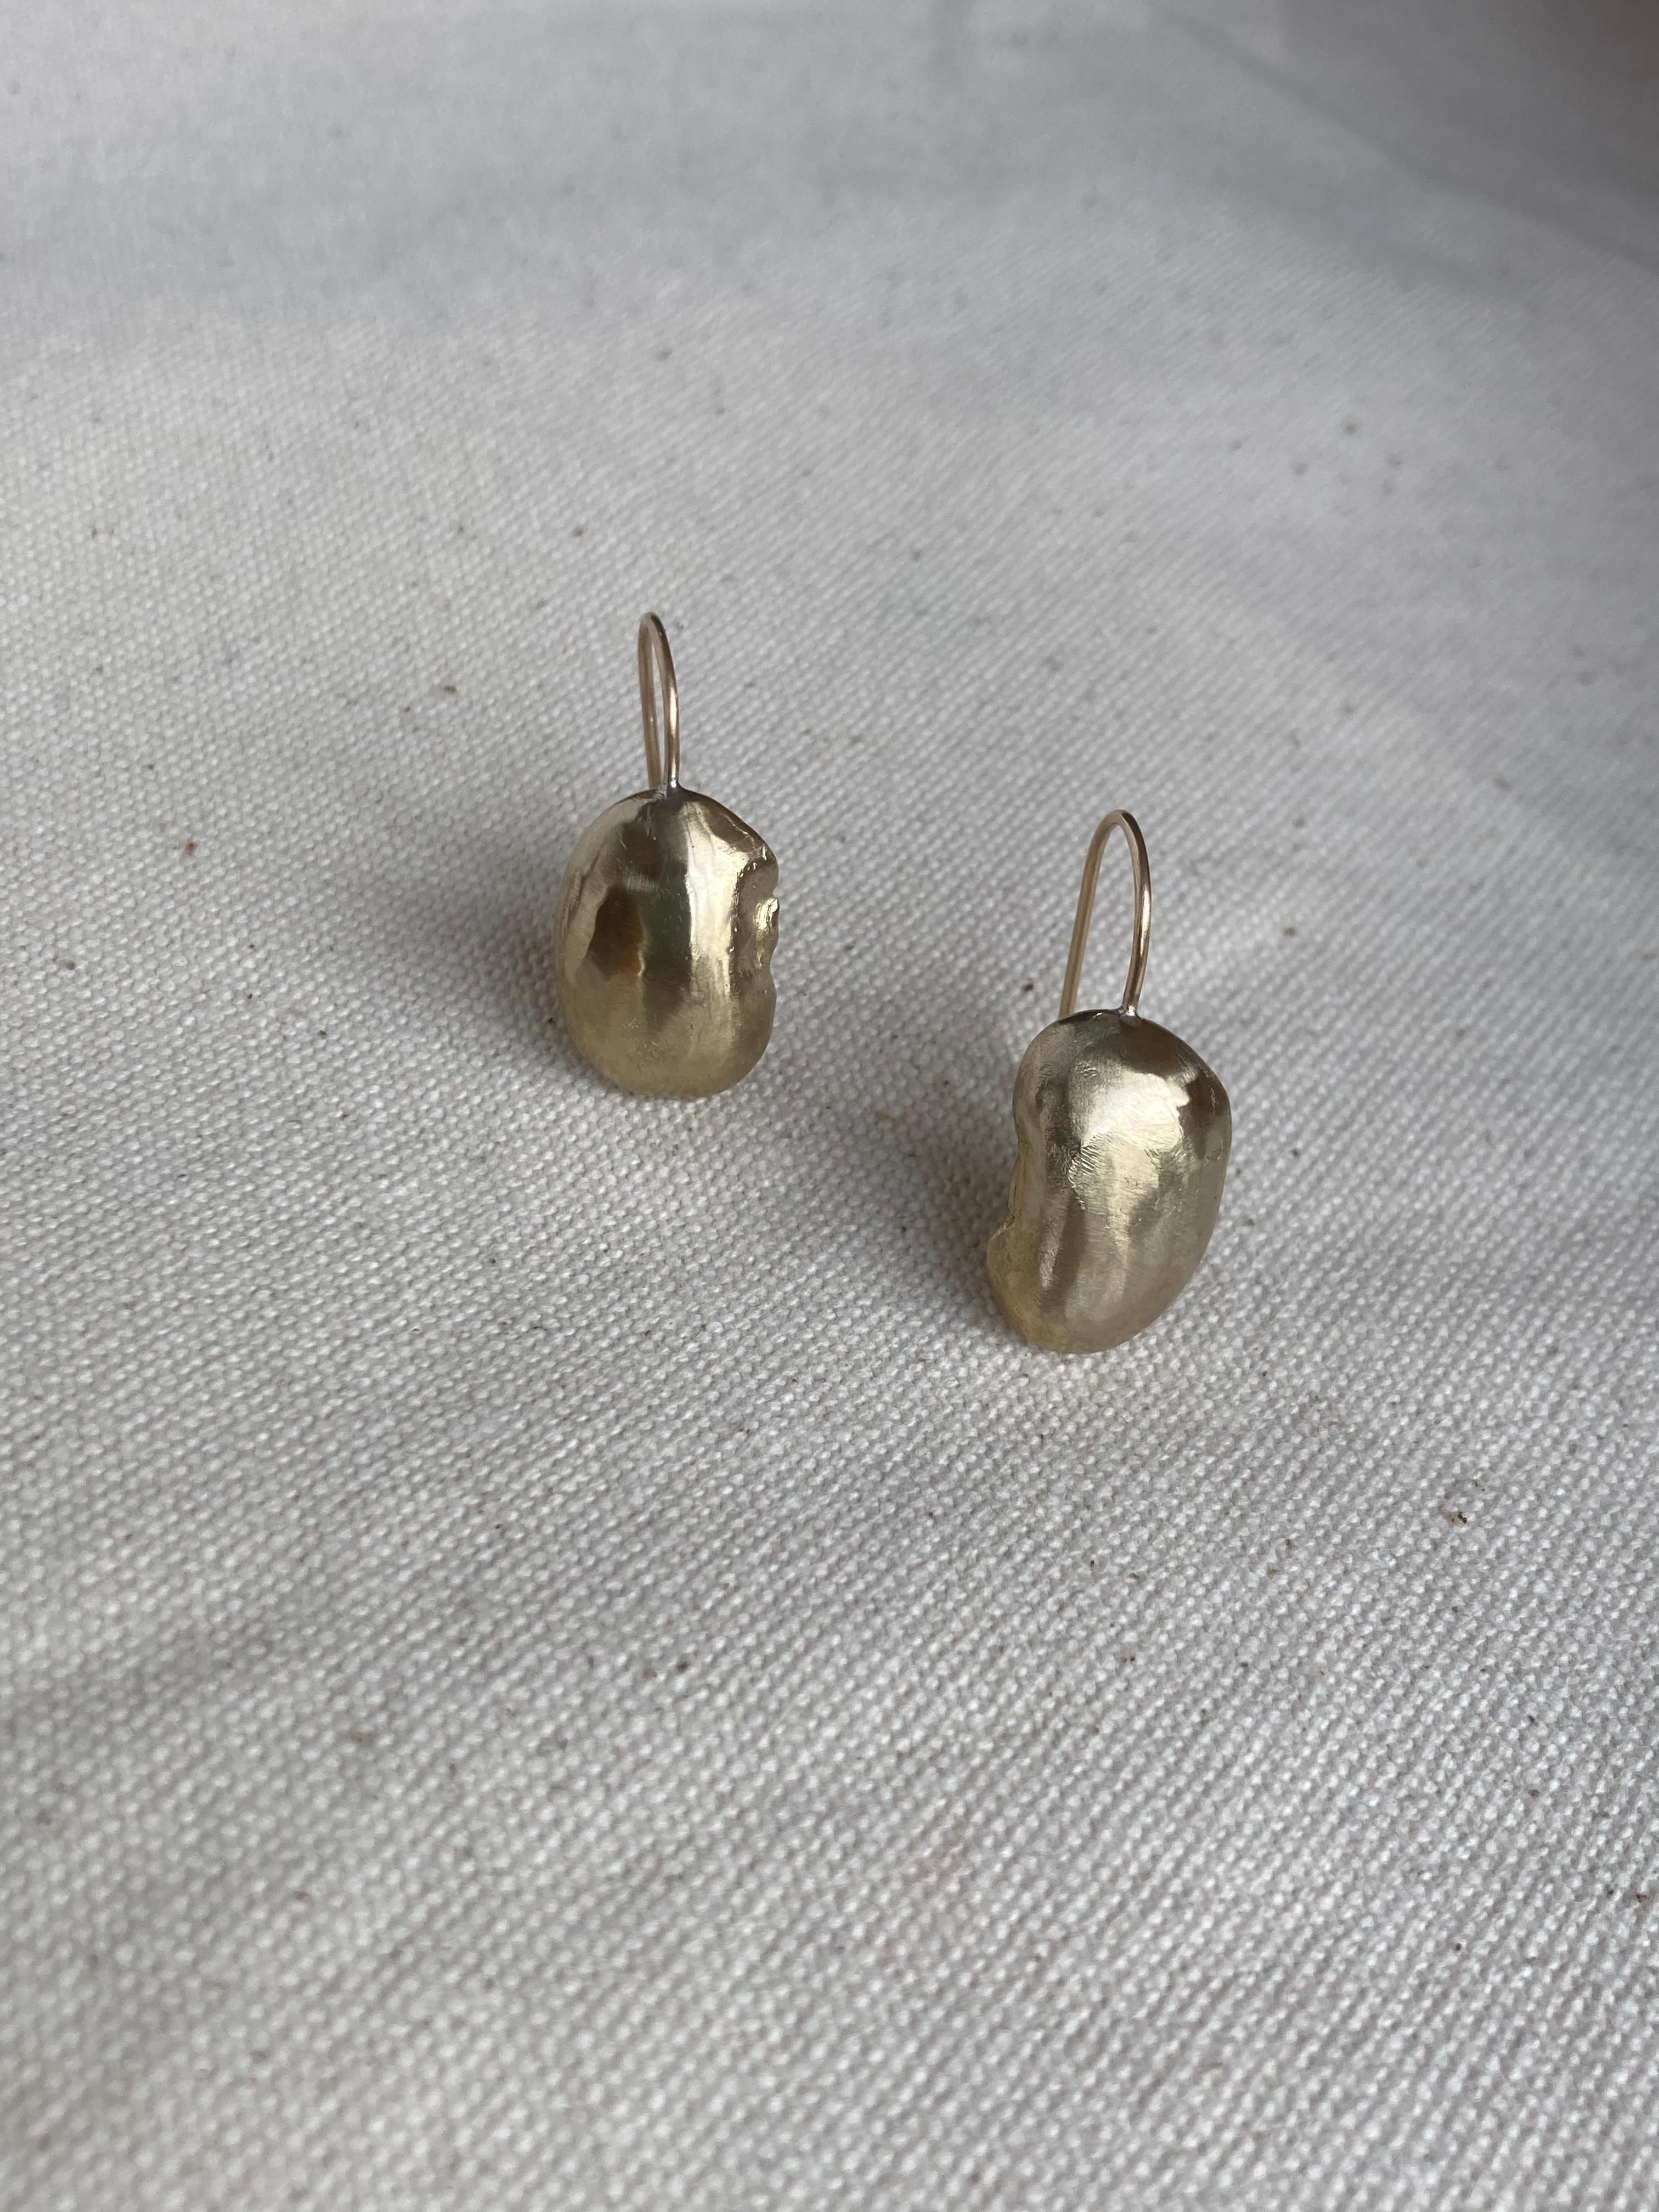 Elegant stud earrings made from Butter beans, cast in golden brass with a gold plated hook for comfortable wear.

The finished surface is naturally finished, bearing the marks of their making. 

They are secured to the ear with a classic hook.

All